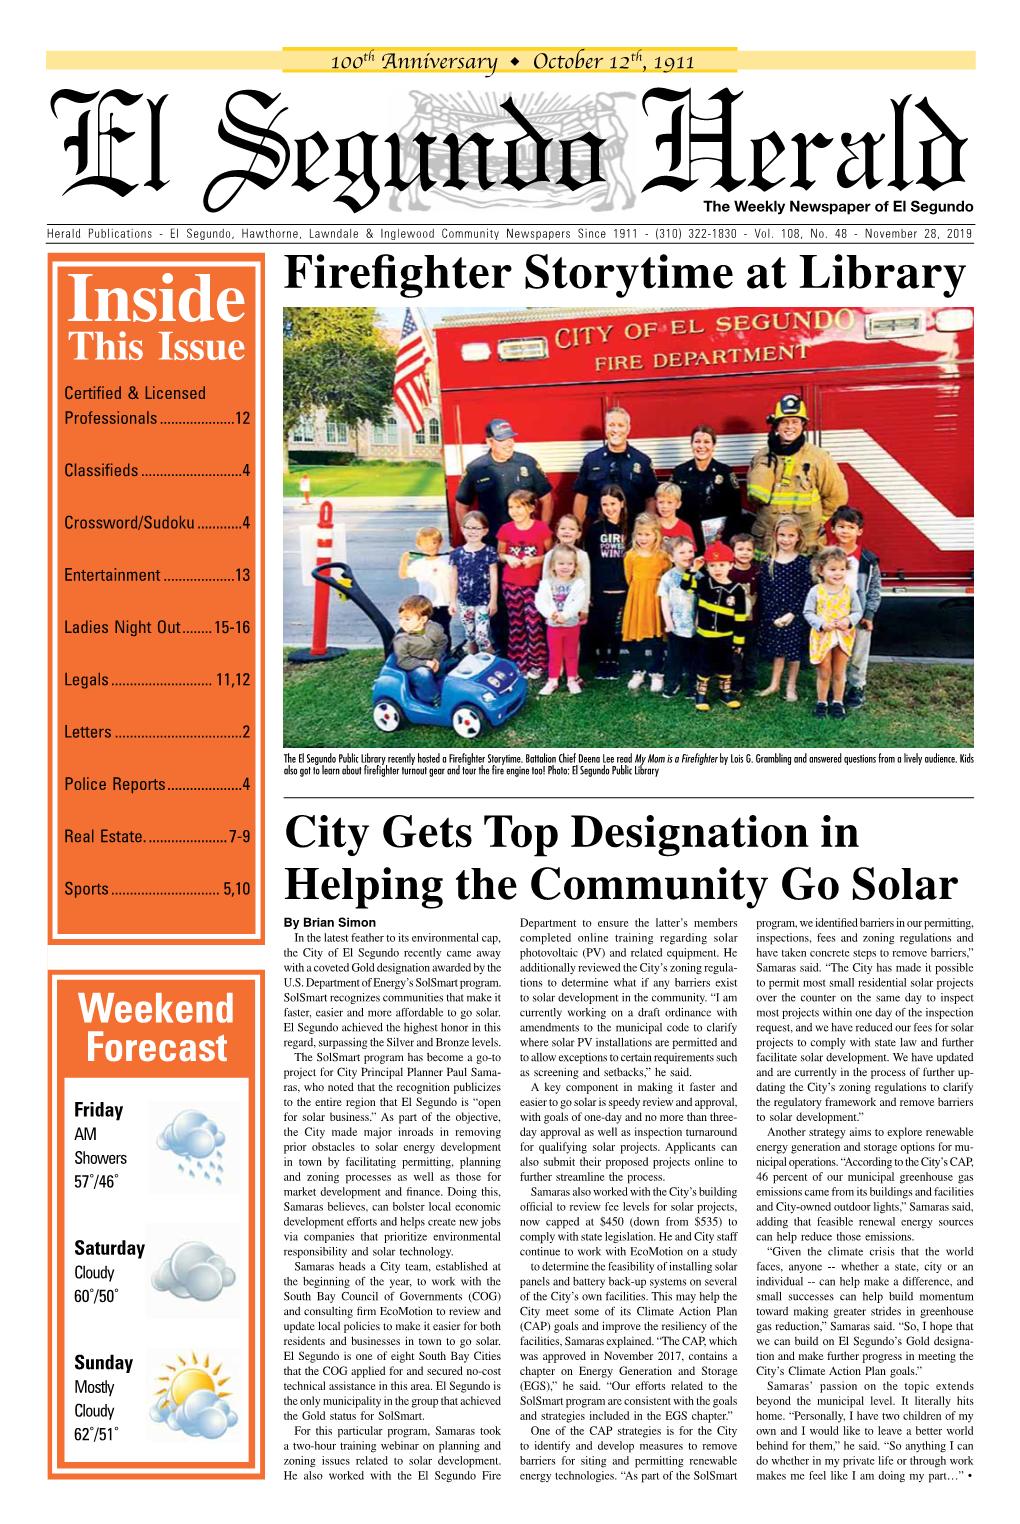 Firefighter Storytime at Library This Issue Certified & Licensed Professionals